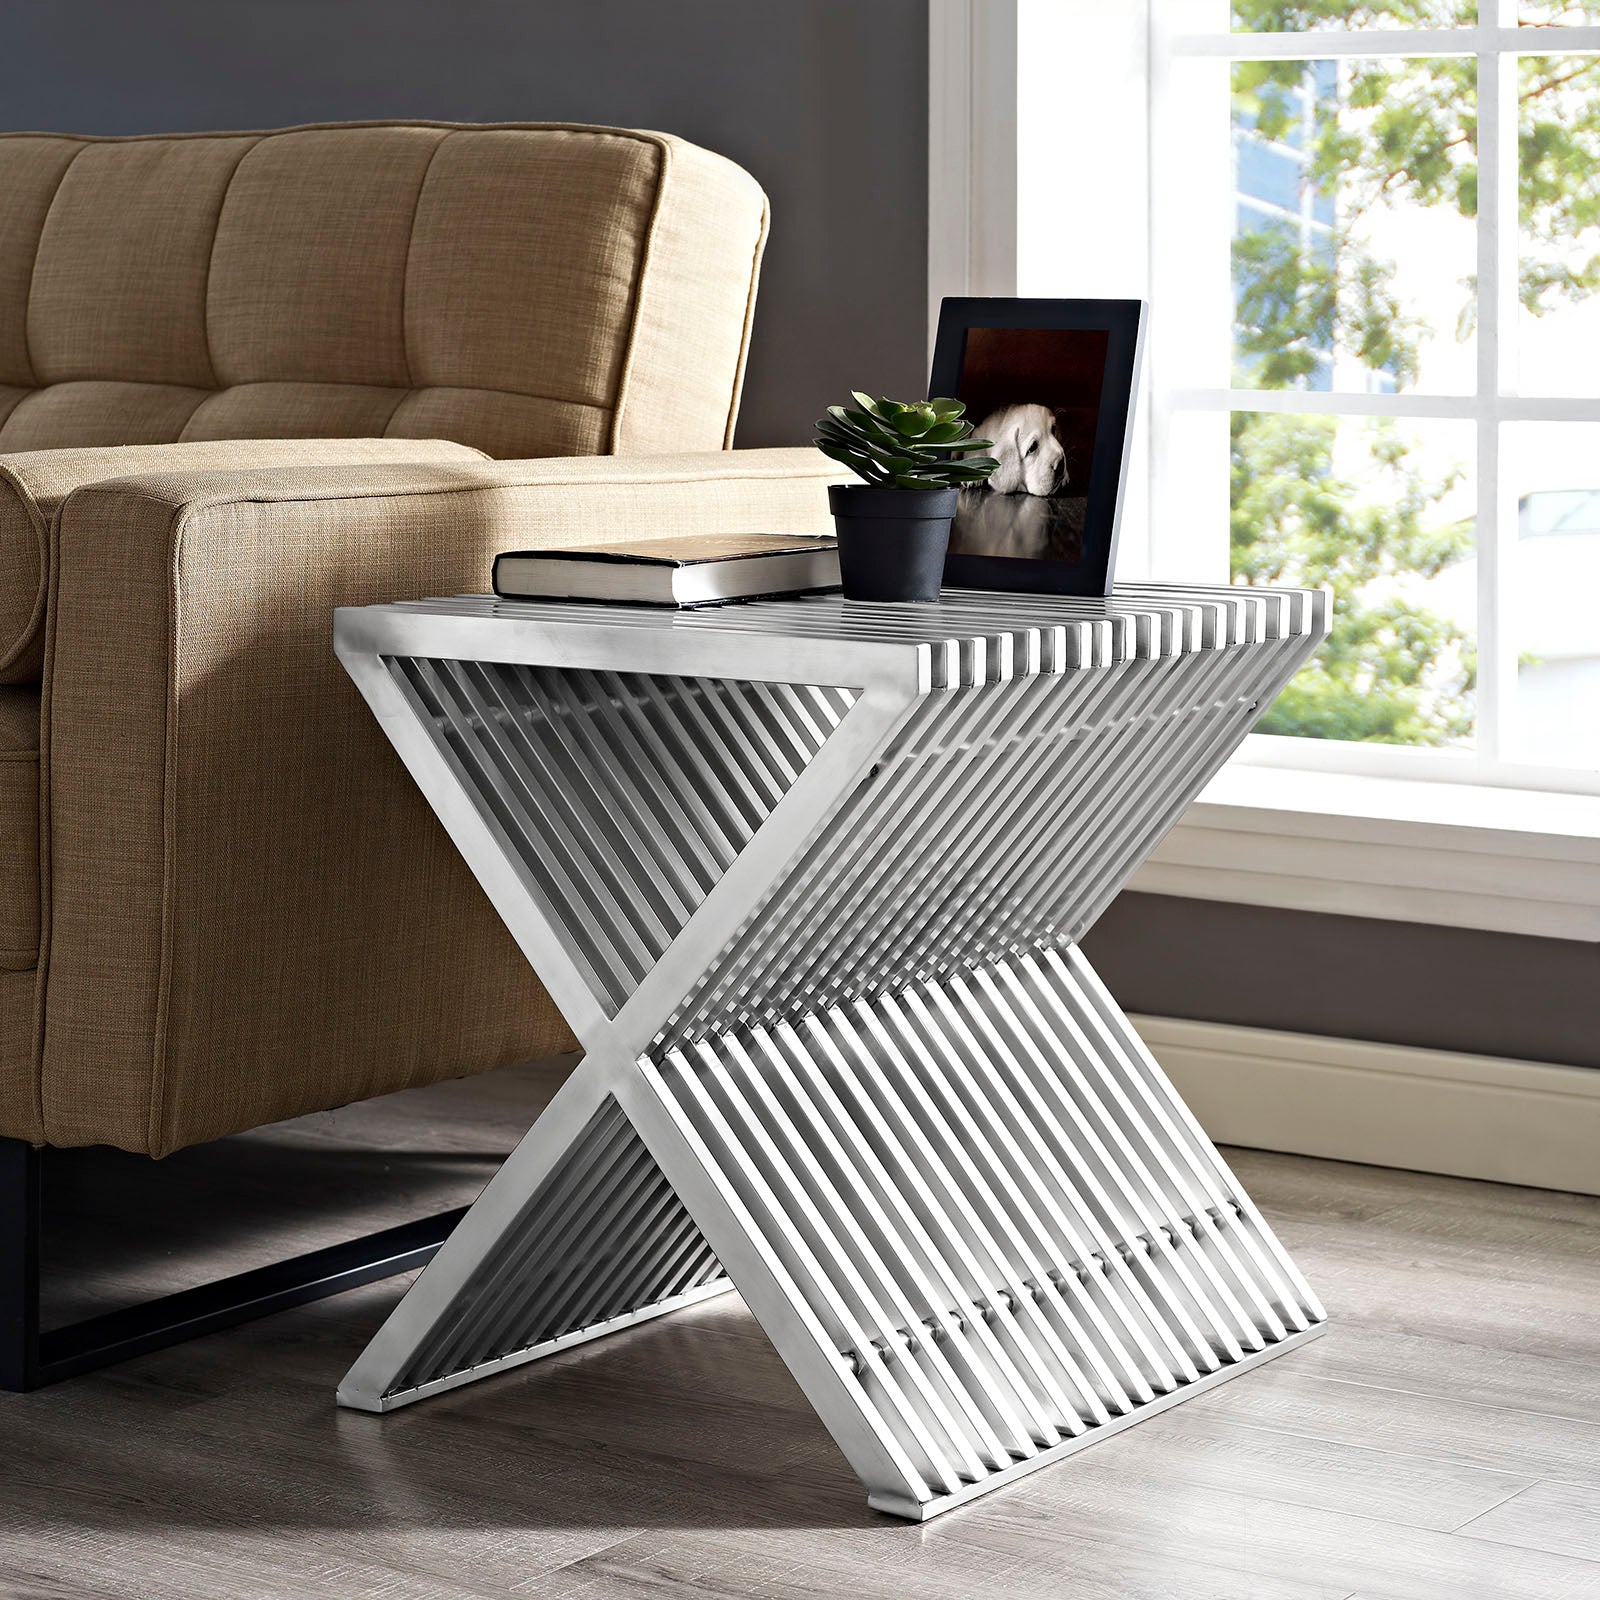 Press Stainless Steel Side Table - East Shore Modern Home Furnishings